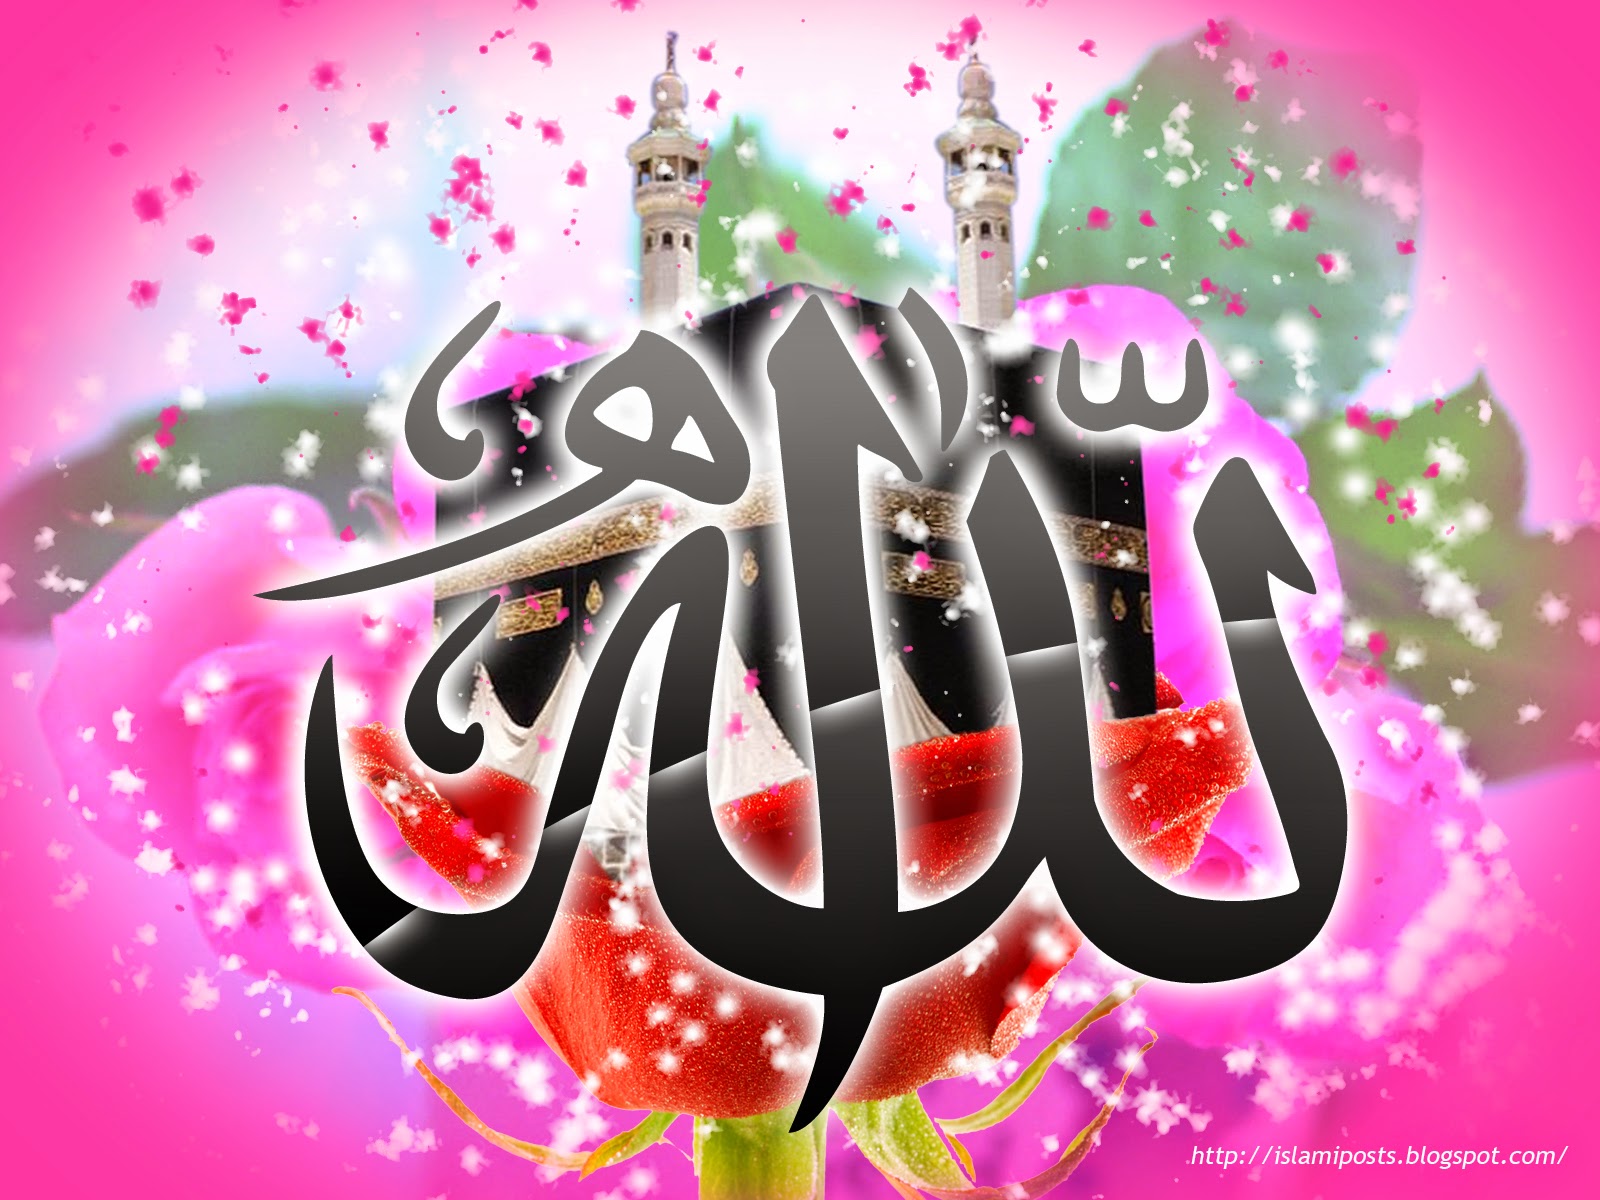 allah name picture wallpaper,text,graphic design,pink,font,calligraphy